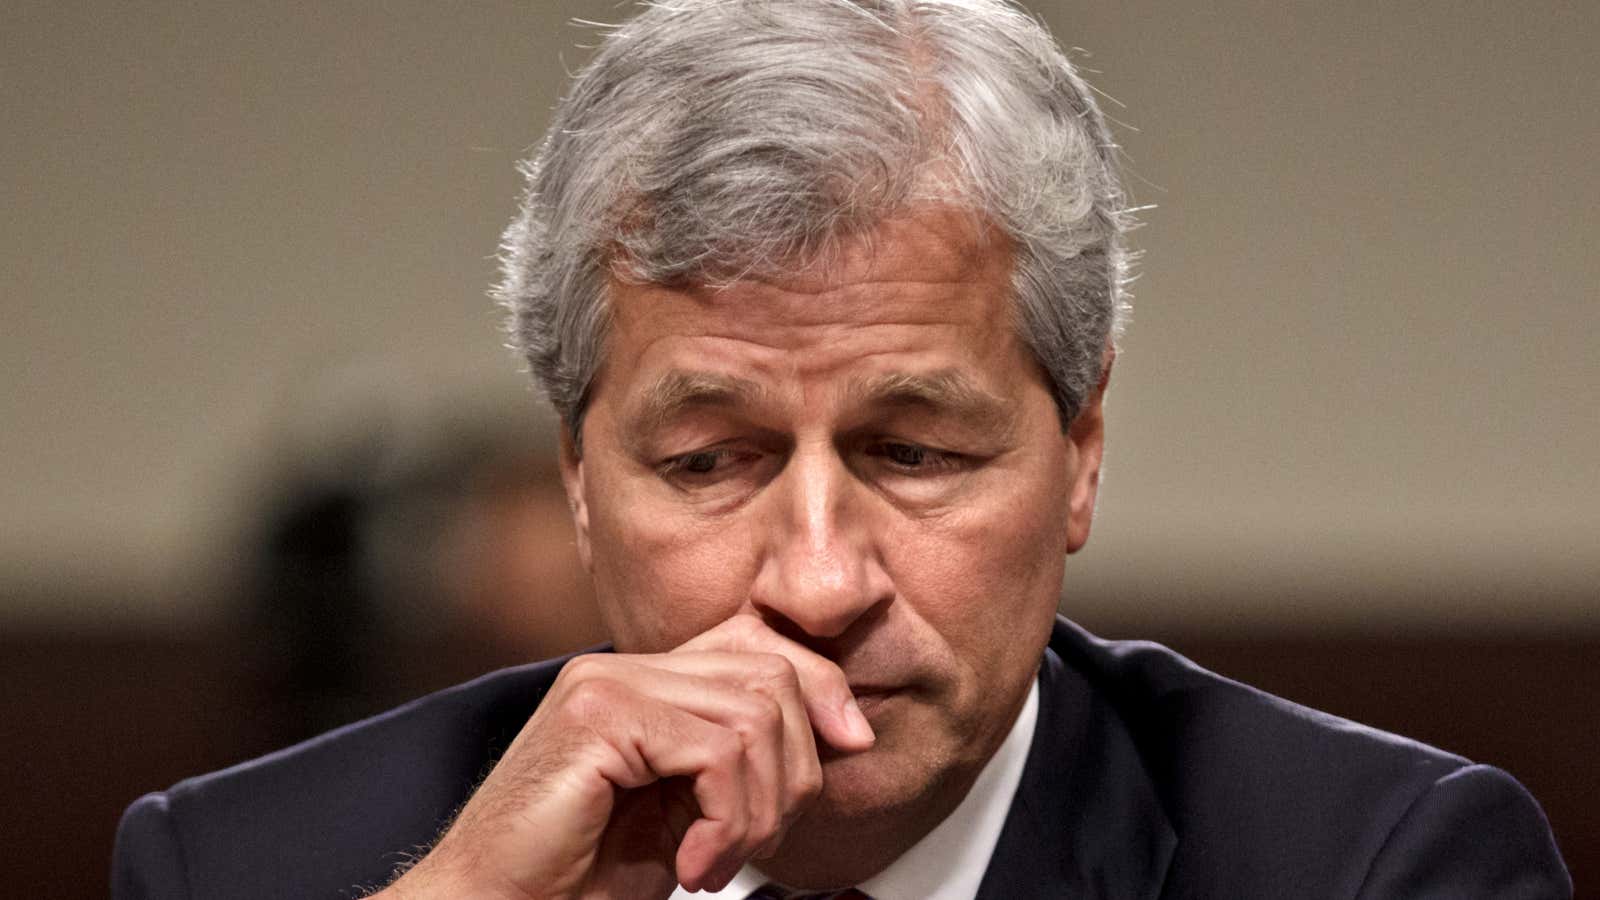 You may see less of JPMorgan’s Jamie Dimon in the near future.